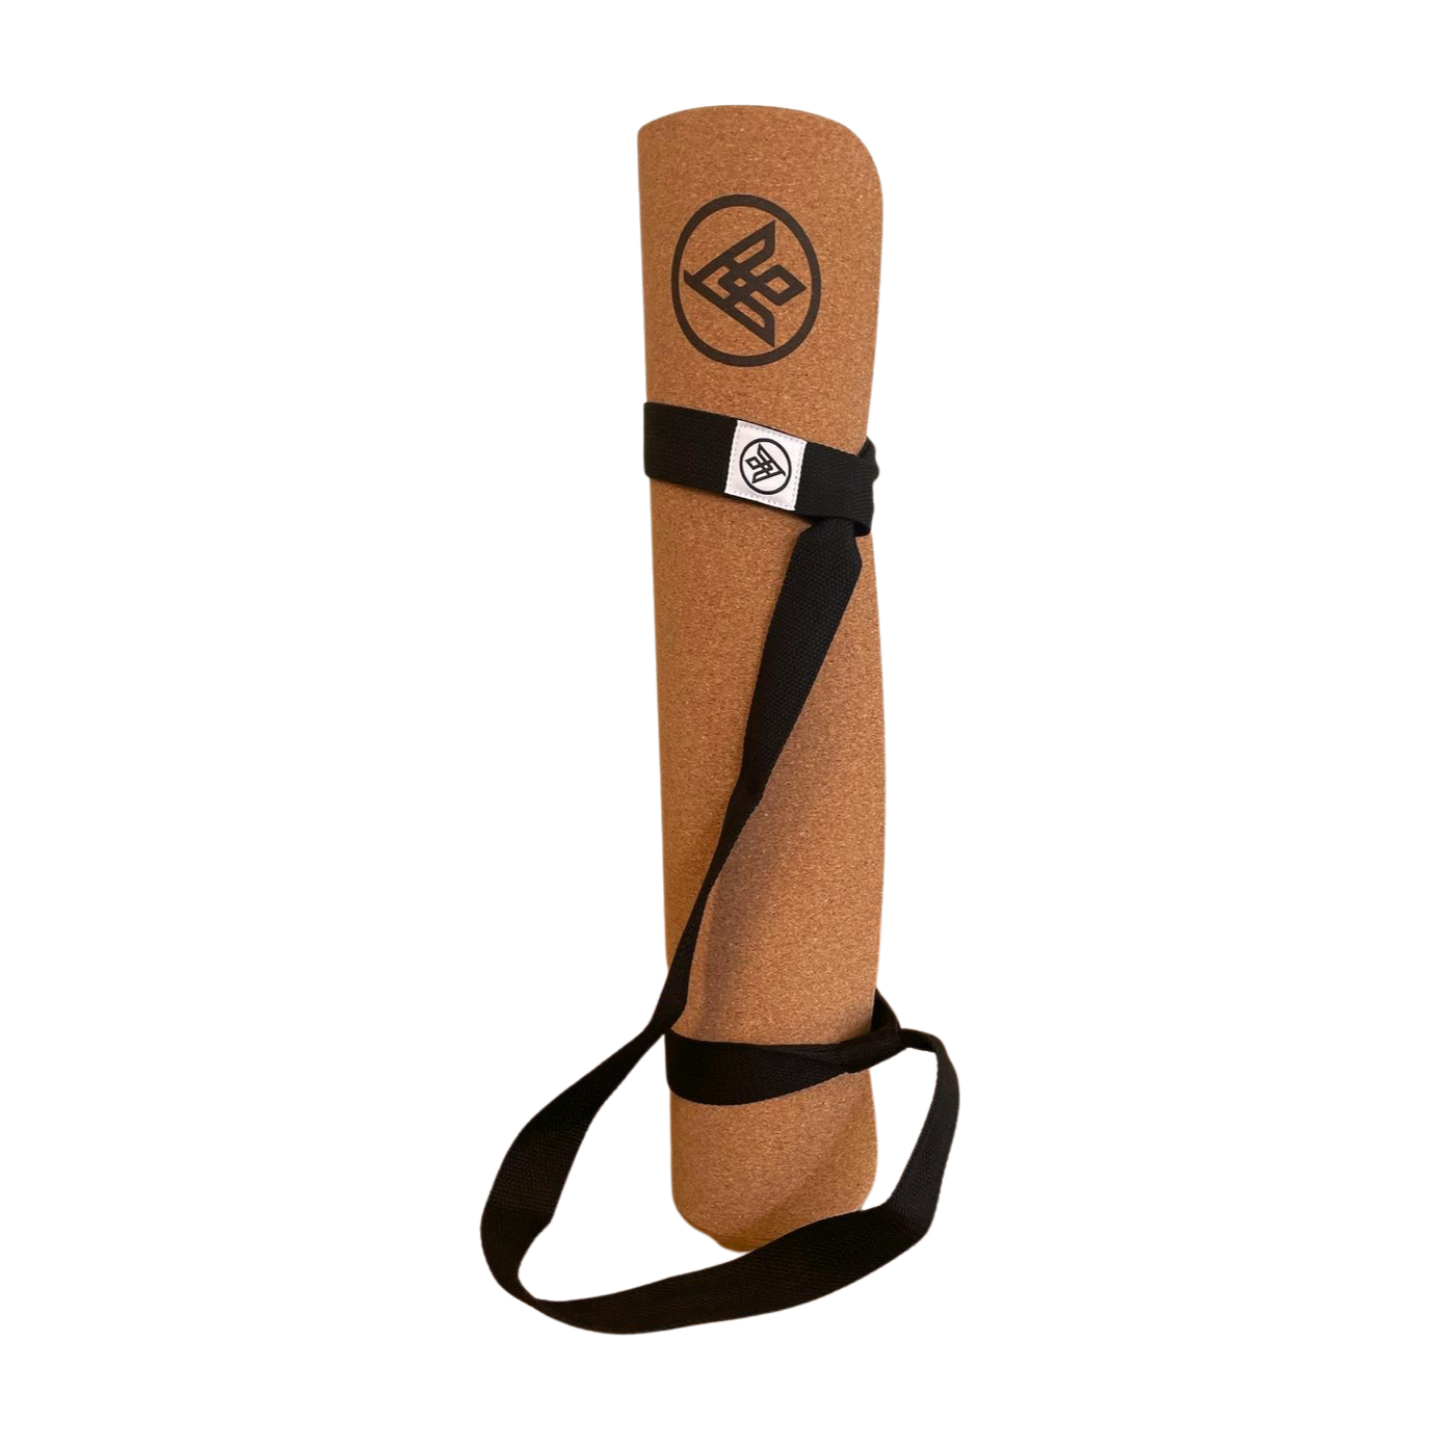 The 'Simple' Yoga Mat Carrying Strap by Asivana Yoga